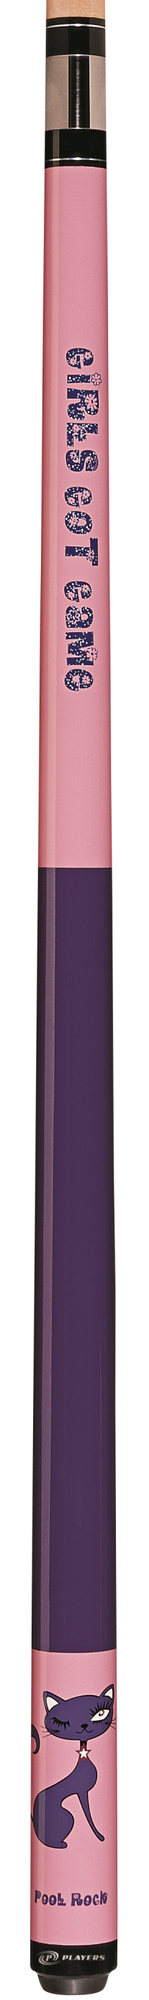 Players Players Y-G02-48  Youth Cue 48 Pool Cue Pool Cue